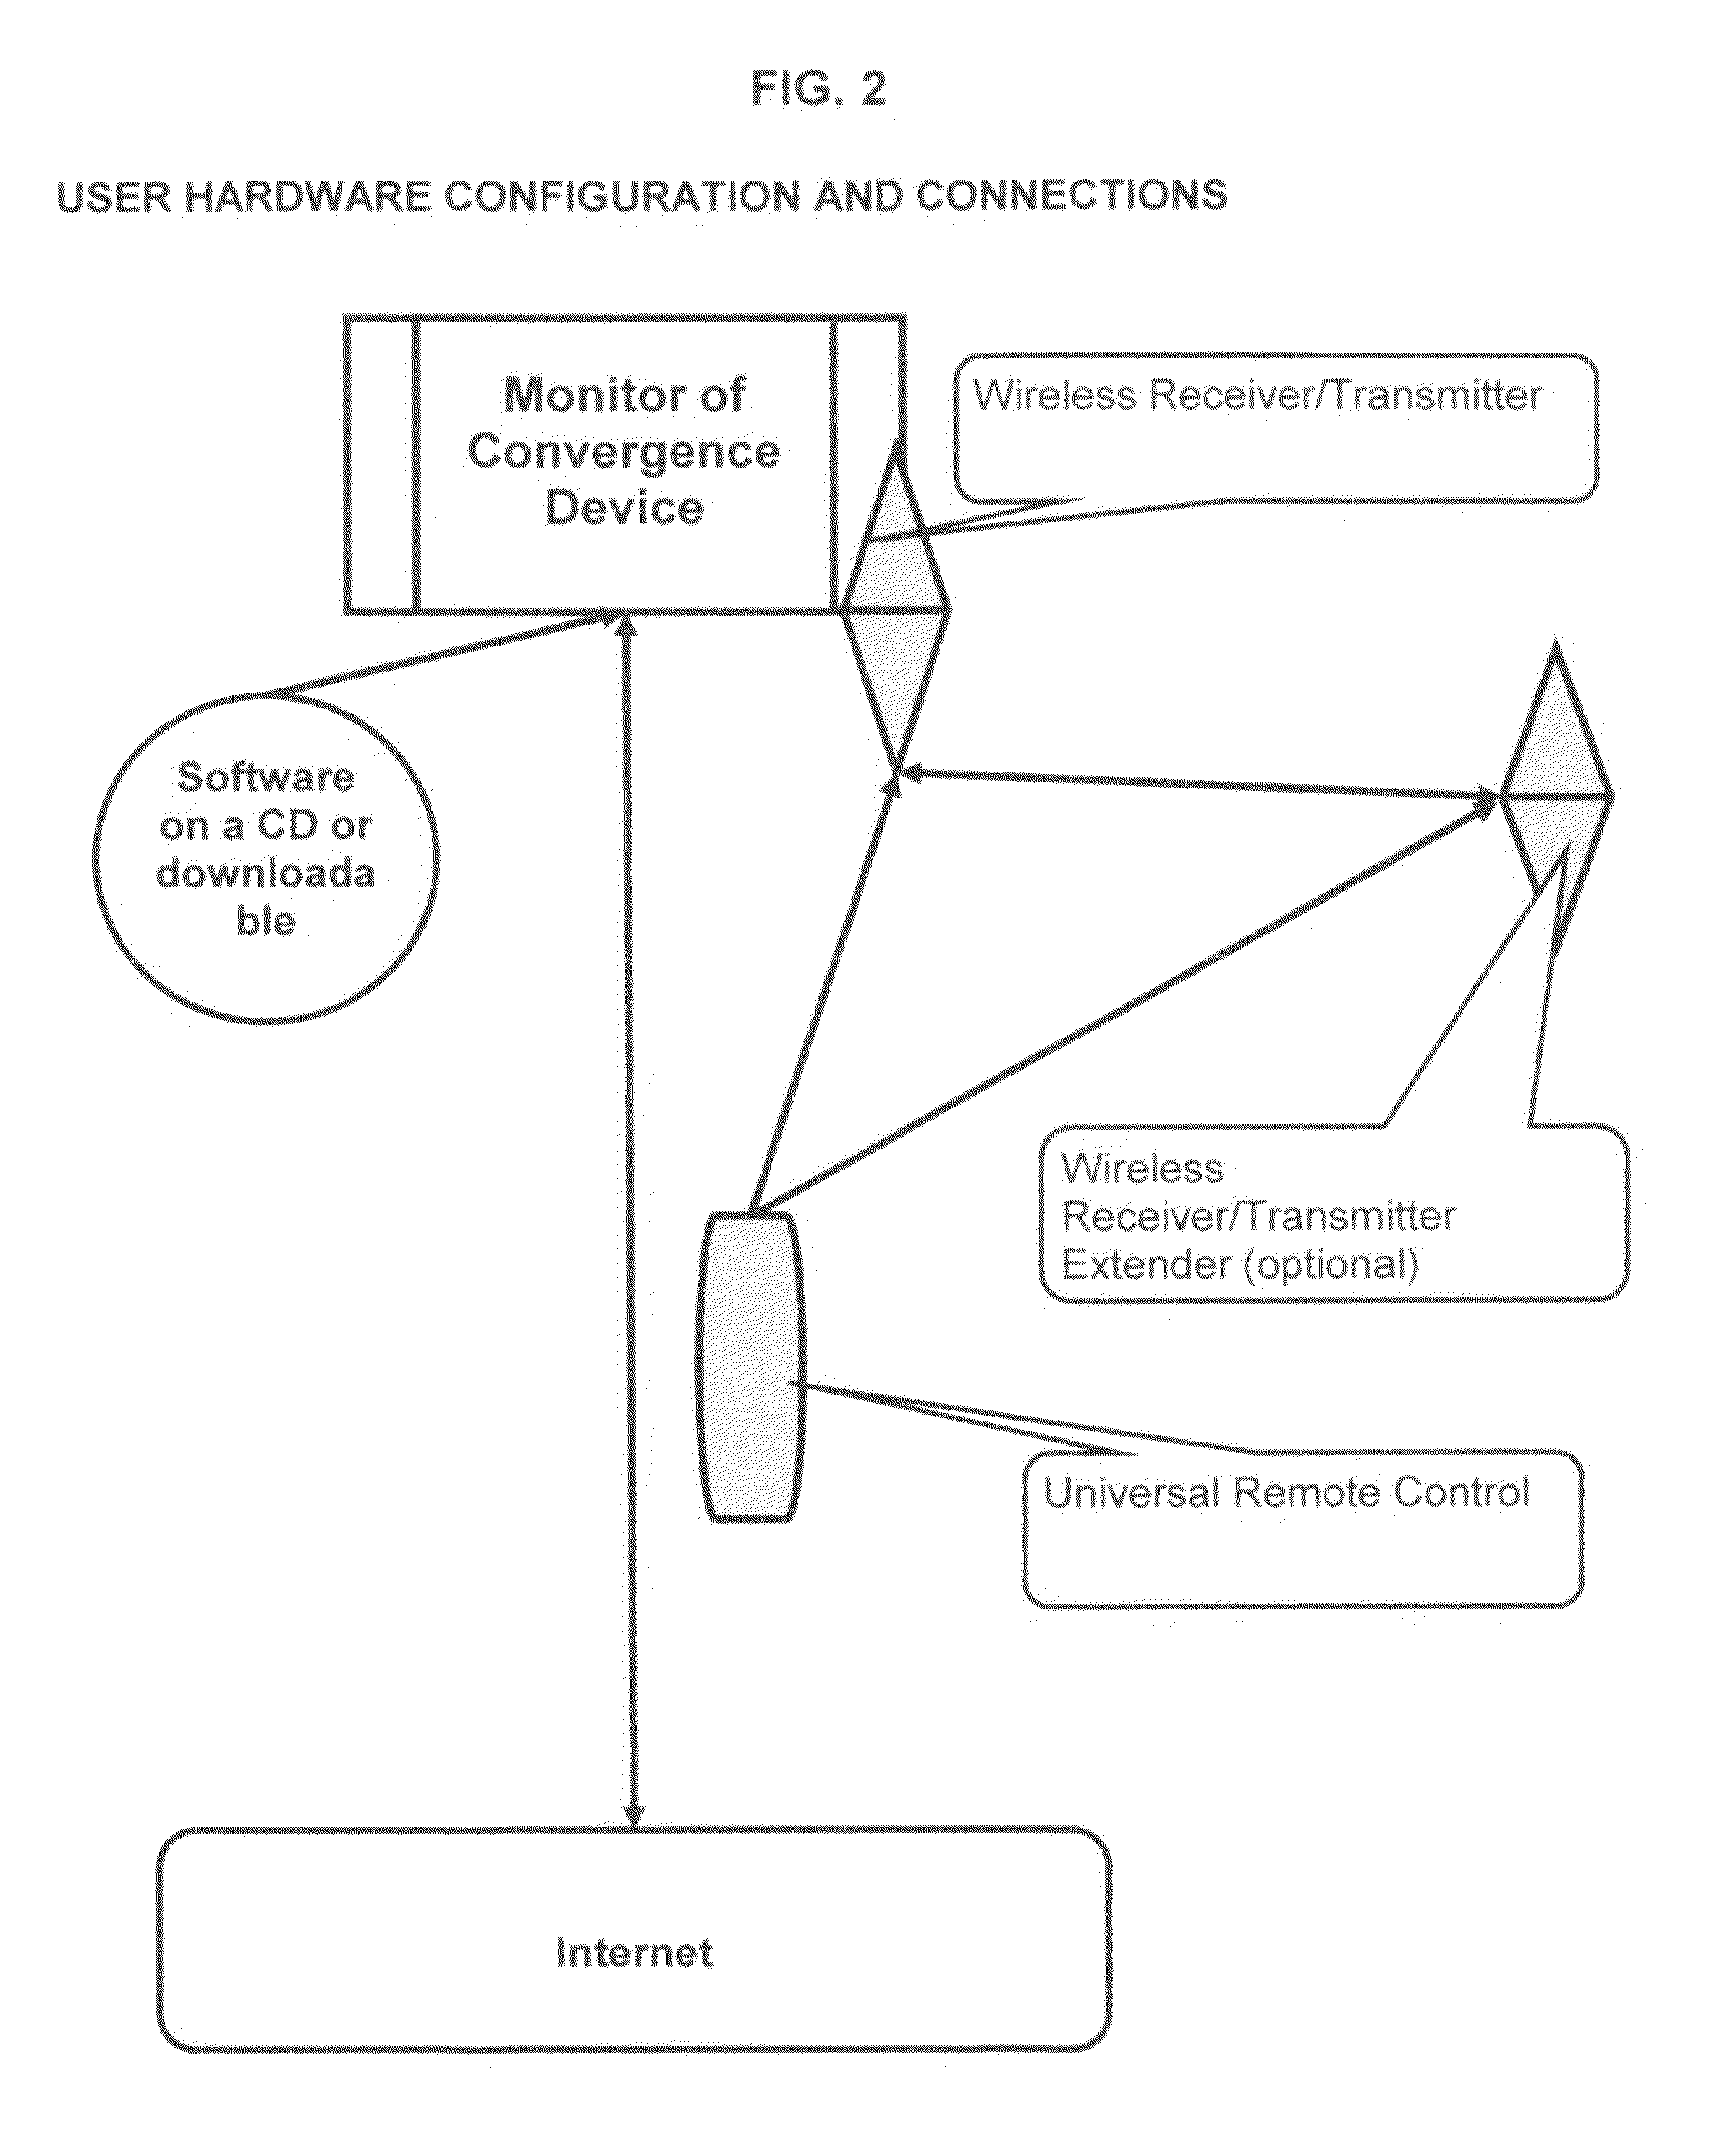 Software based Internet/Television convergence methods and systems for organizing and displaying Internet media content on computers and Television sets